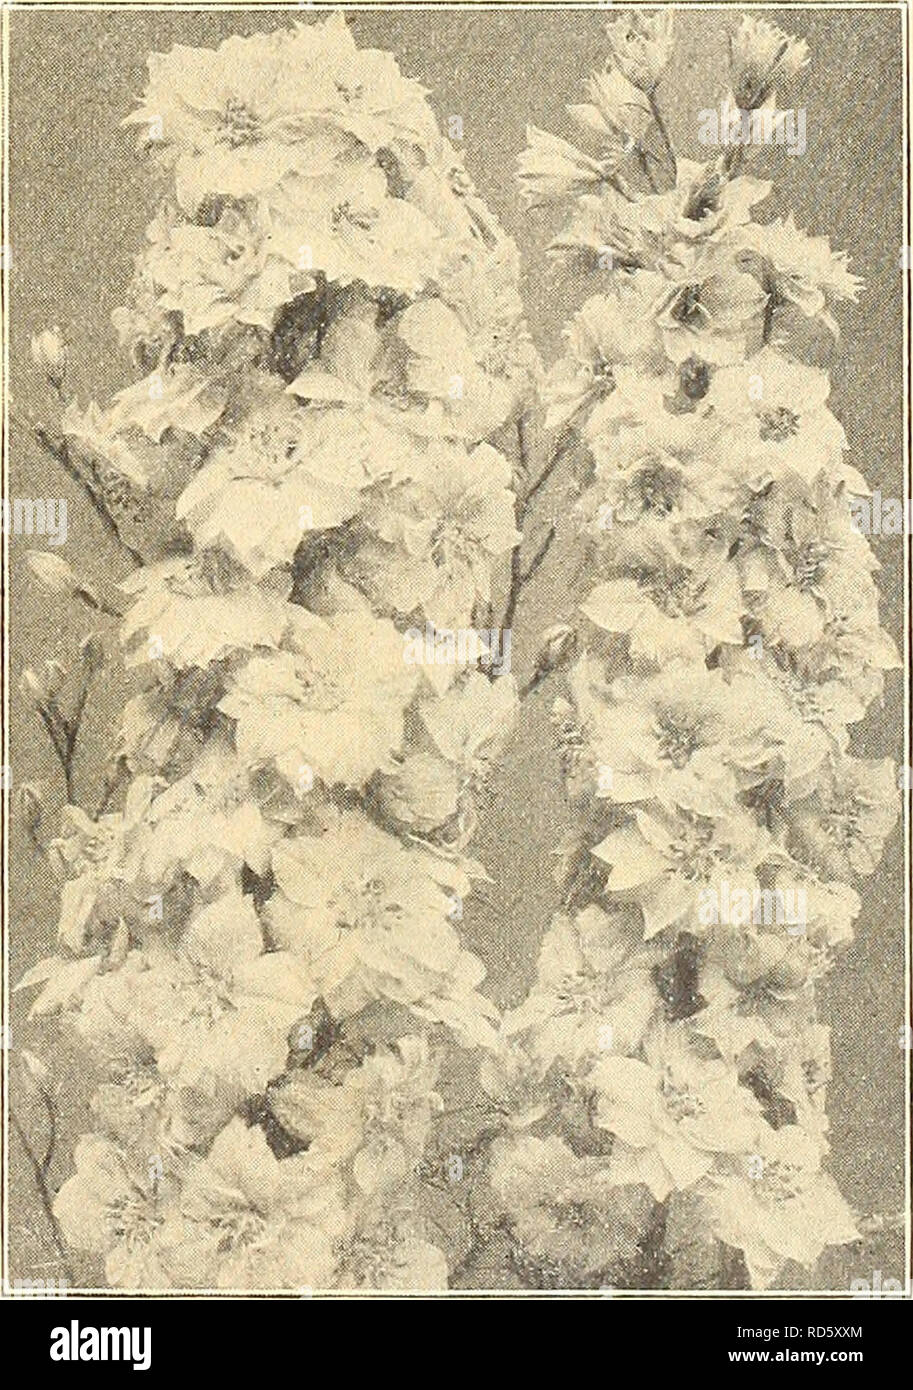 . Currie's farm &amp; garden annual : spring 1922 47th year. Flowers Seeds Catalogs; Bulbs (Plants) Seeds Catalogs; Vegetables Seeds Catalogs; Nurseries (Horticulture) Catalogs; Plants, Ornamental Catalogs; Gardening Equipment and supplies Catalogs. Lobelia Tenuior. Perennial Larkspur. LARKSPUR. Annual Varieties. A beautiful and well-known class of hardy annuals, producing long spikes of varied-hued blossoms. Sow in the open ground in April or May. Pkt. Emperor—A profuse bloomer, very double, mixed colors. 1 foot. V4, oz. 25c 5 Stock Flowered—Tall Double White, Dark Blue. Rose and Flesh. Each  Stock Photo